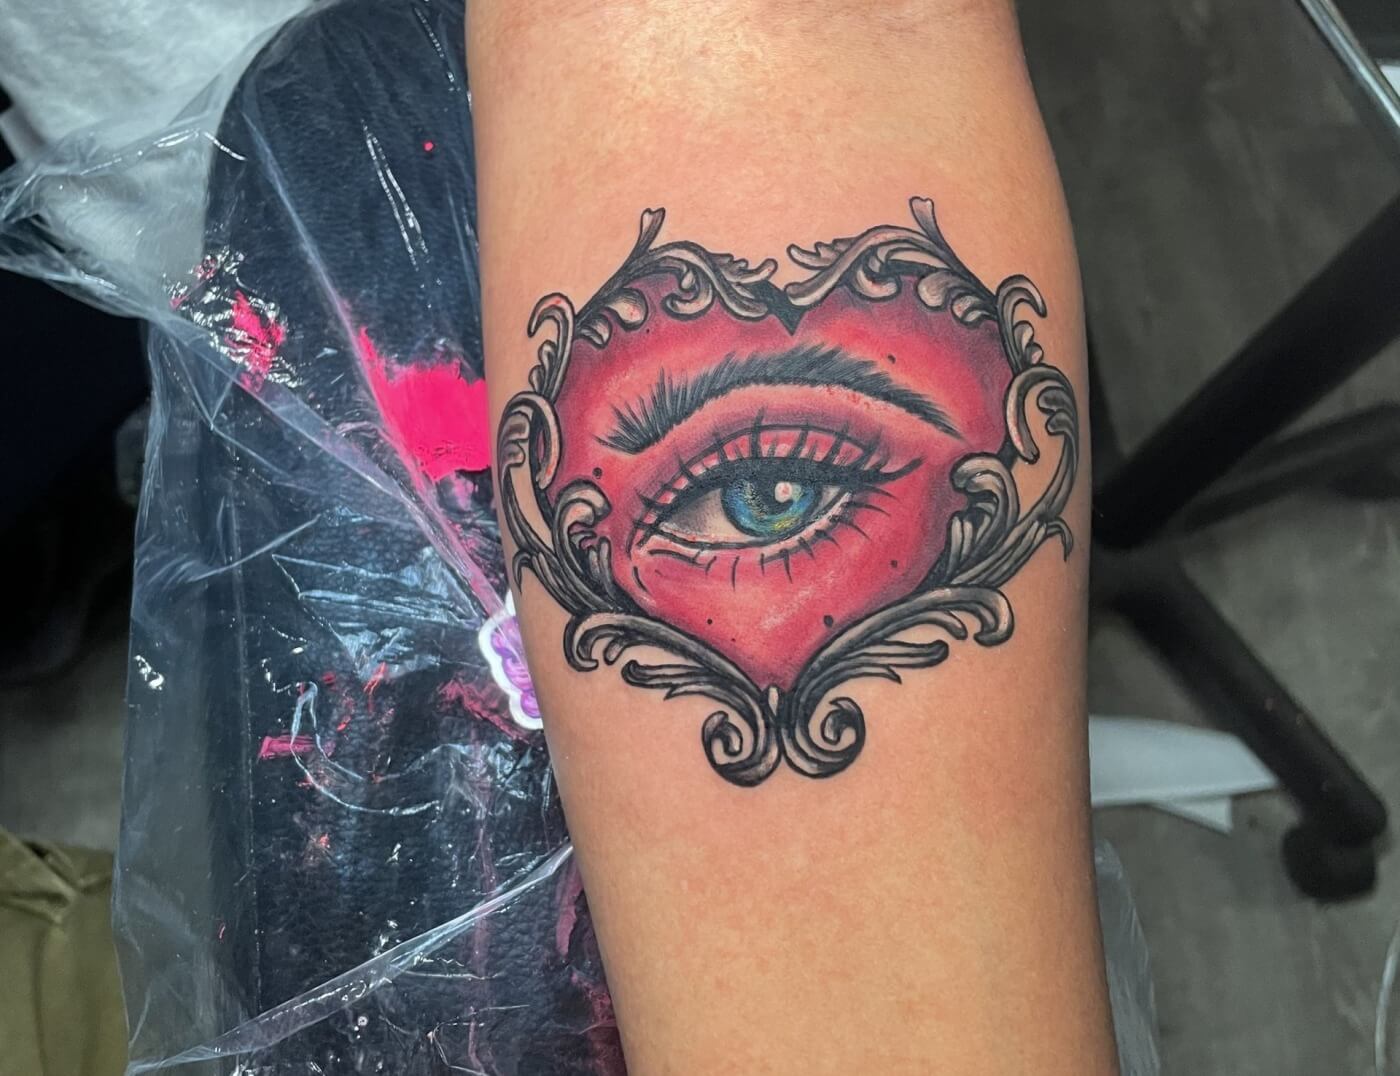 Abstract eye & color tattoo by Paper Airplane Jane at Iron Palm Tattoos in south downtown Atlanta. We're open late night and walk Ins are welcome. Call 404-973-7828 or stop by for a free consultation.